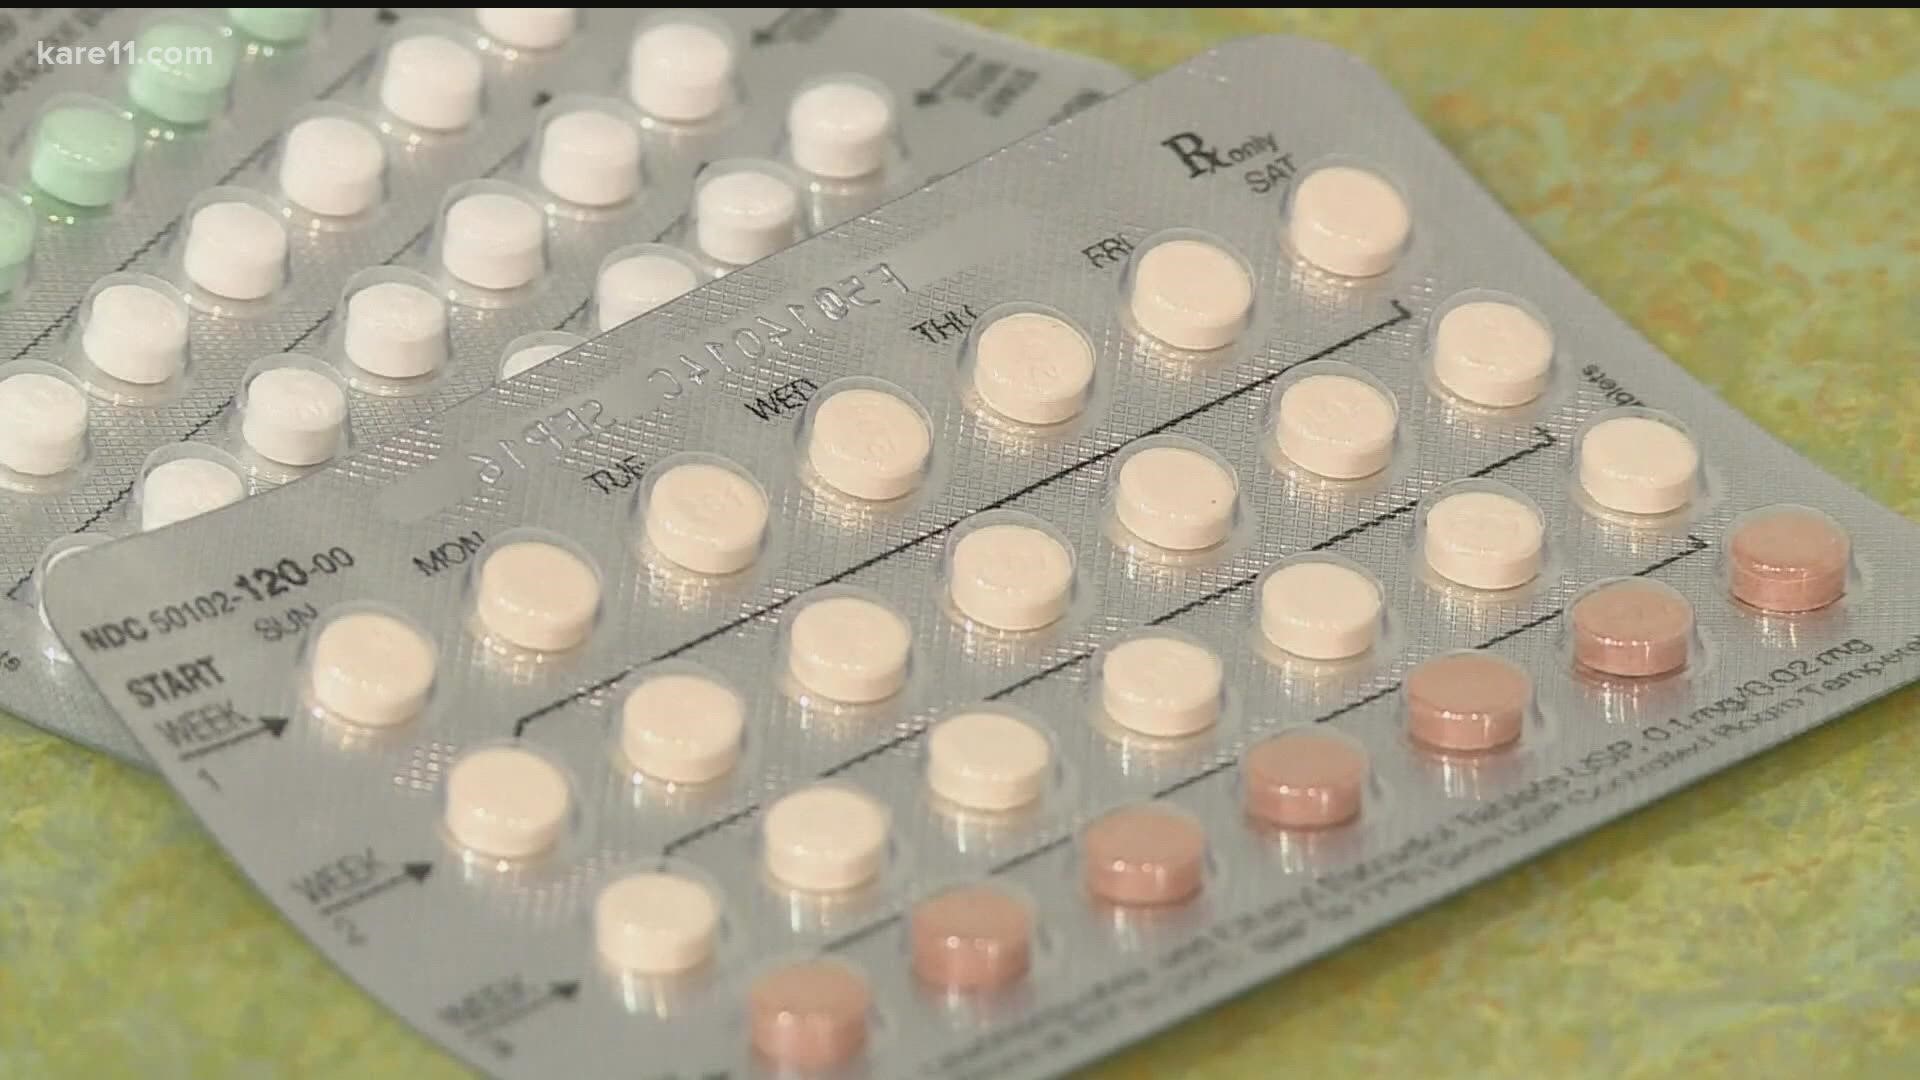 COVID has changed the way we go to the doctor, and being able to get birth control online has given access to more women in Minnesota and the U.S.